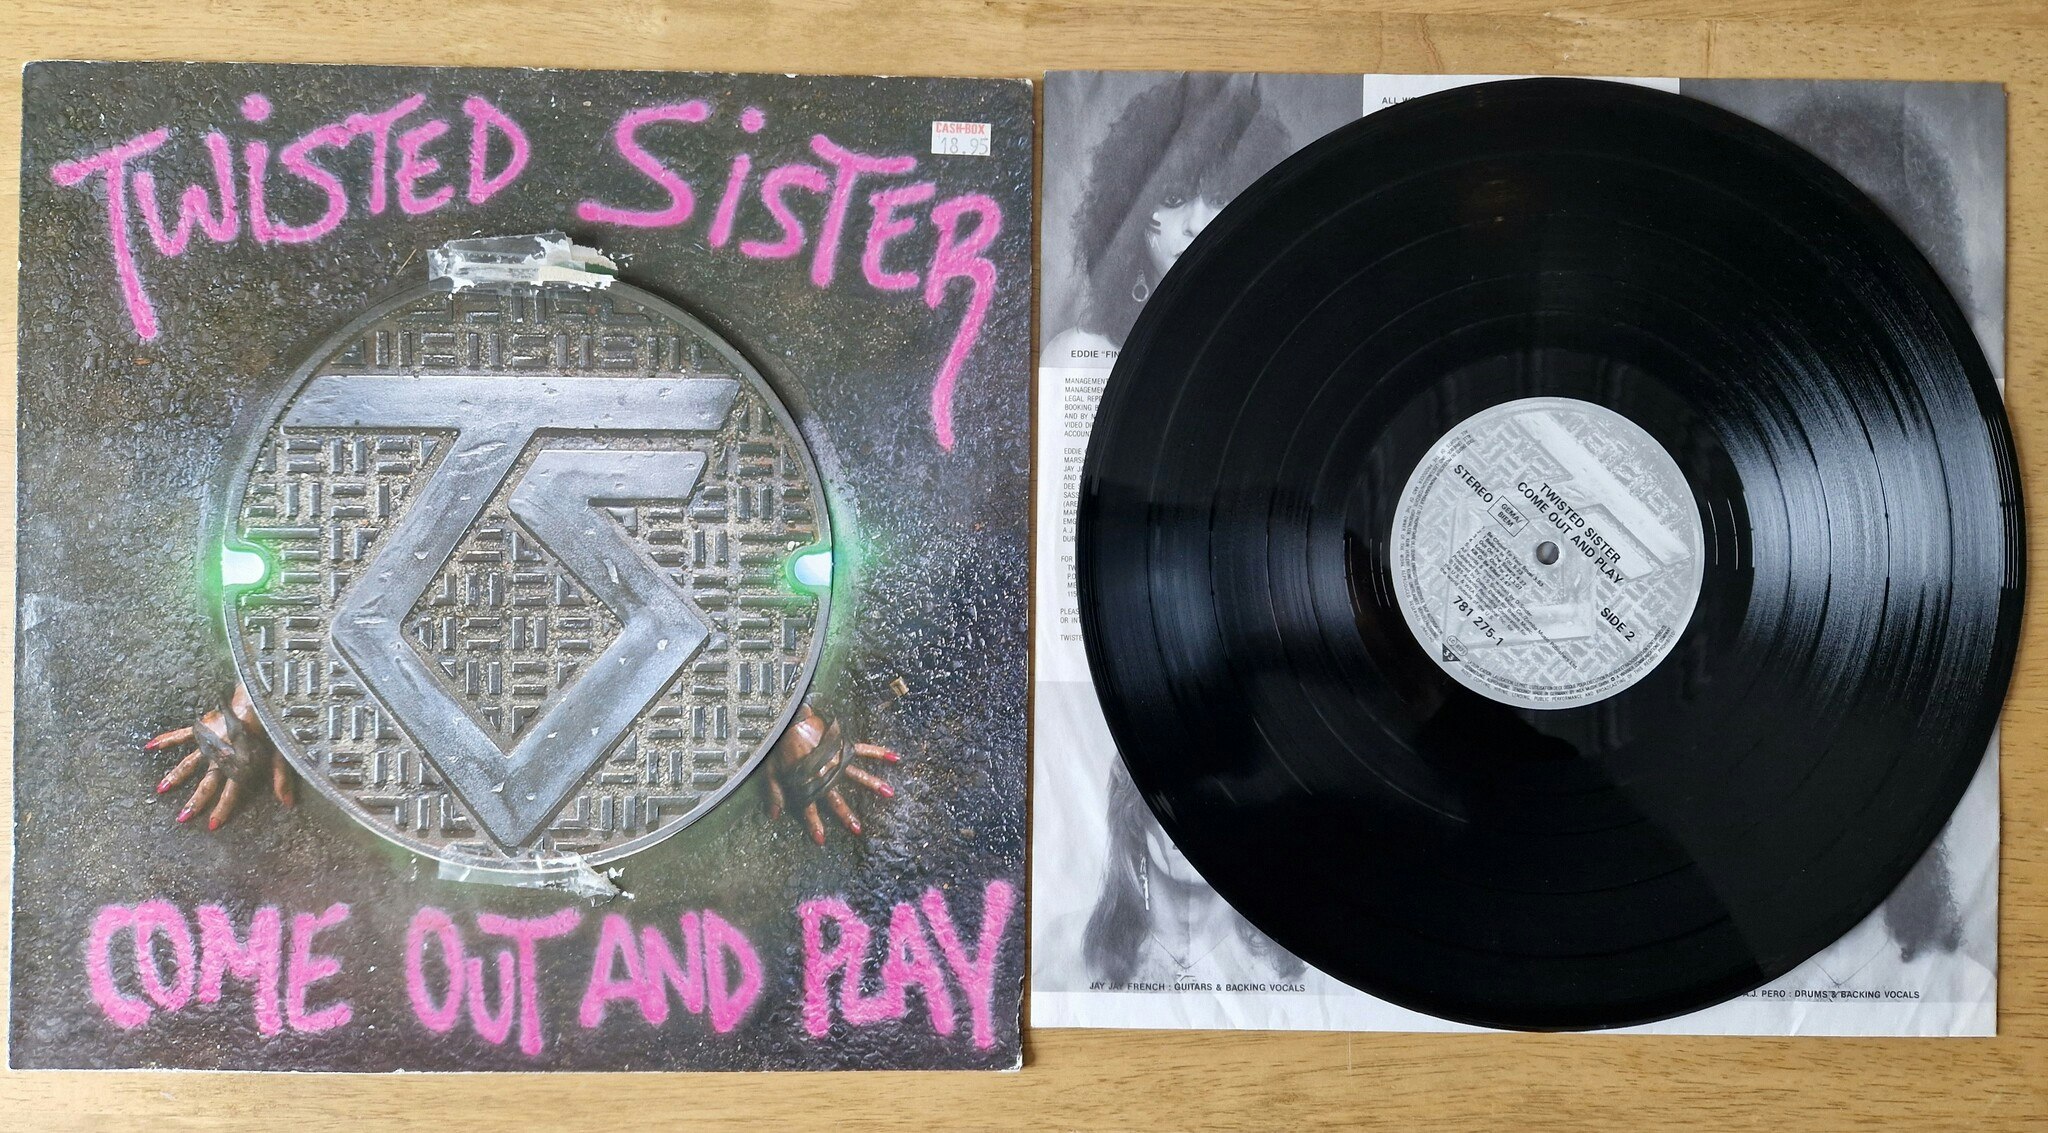 Twisted Sister, Come out and play. Vinyl LP